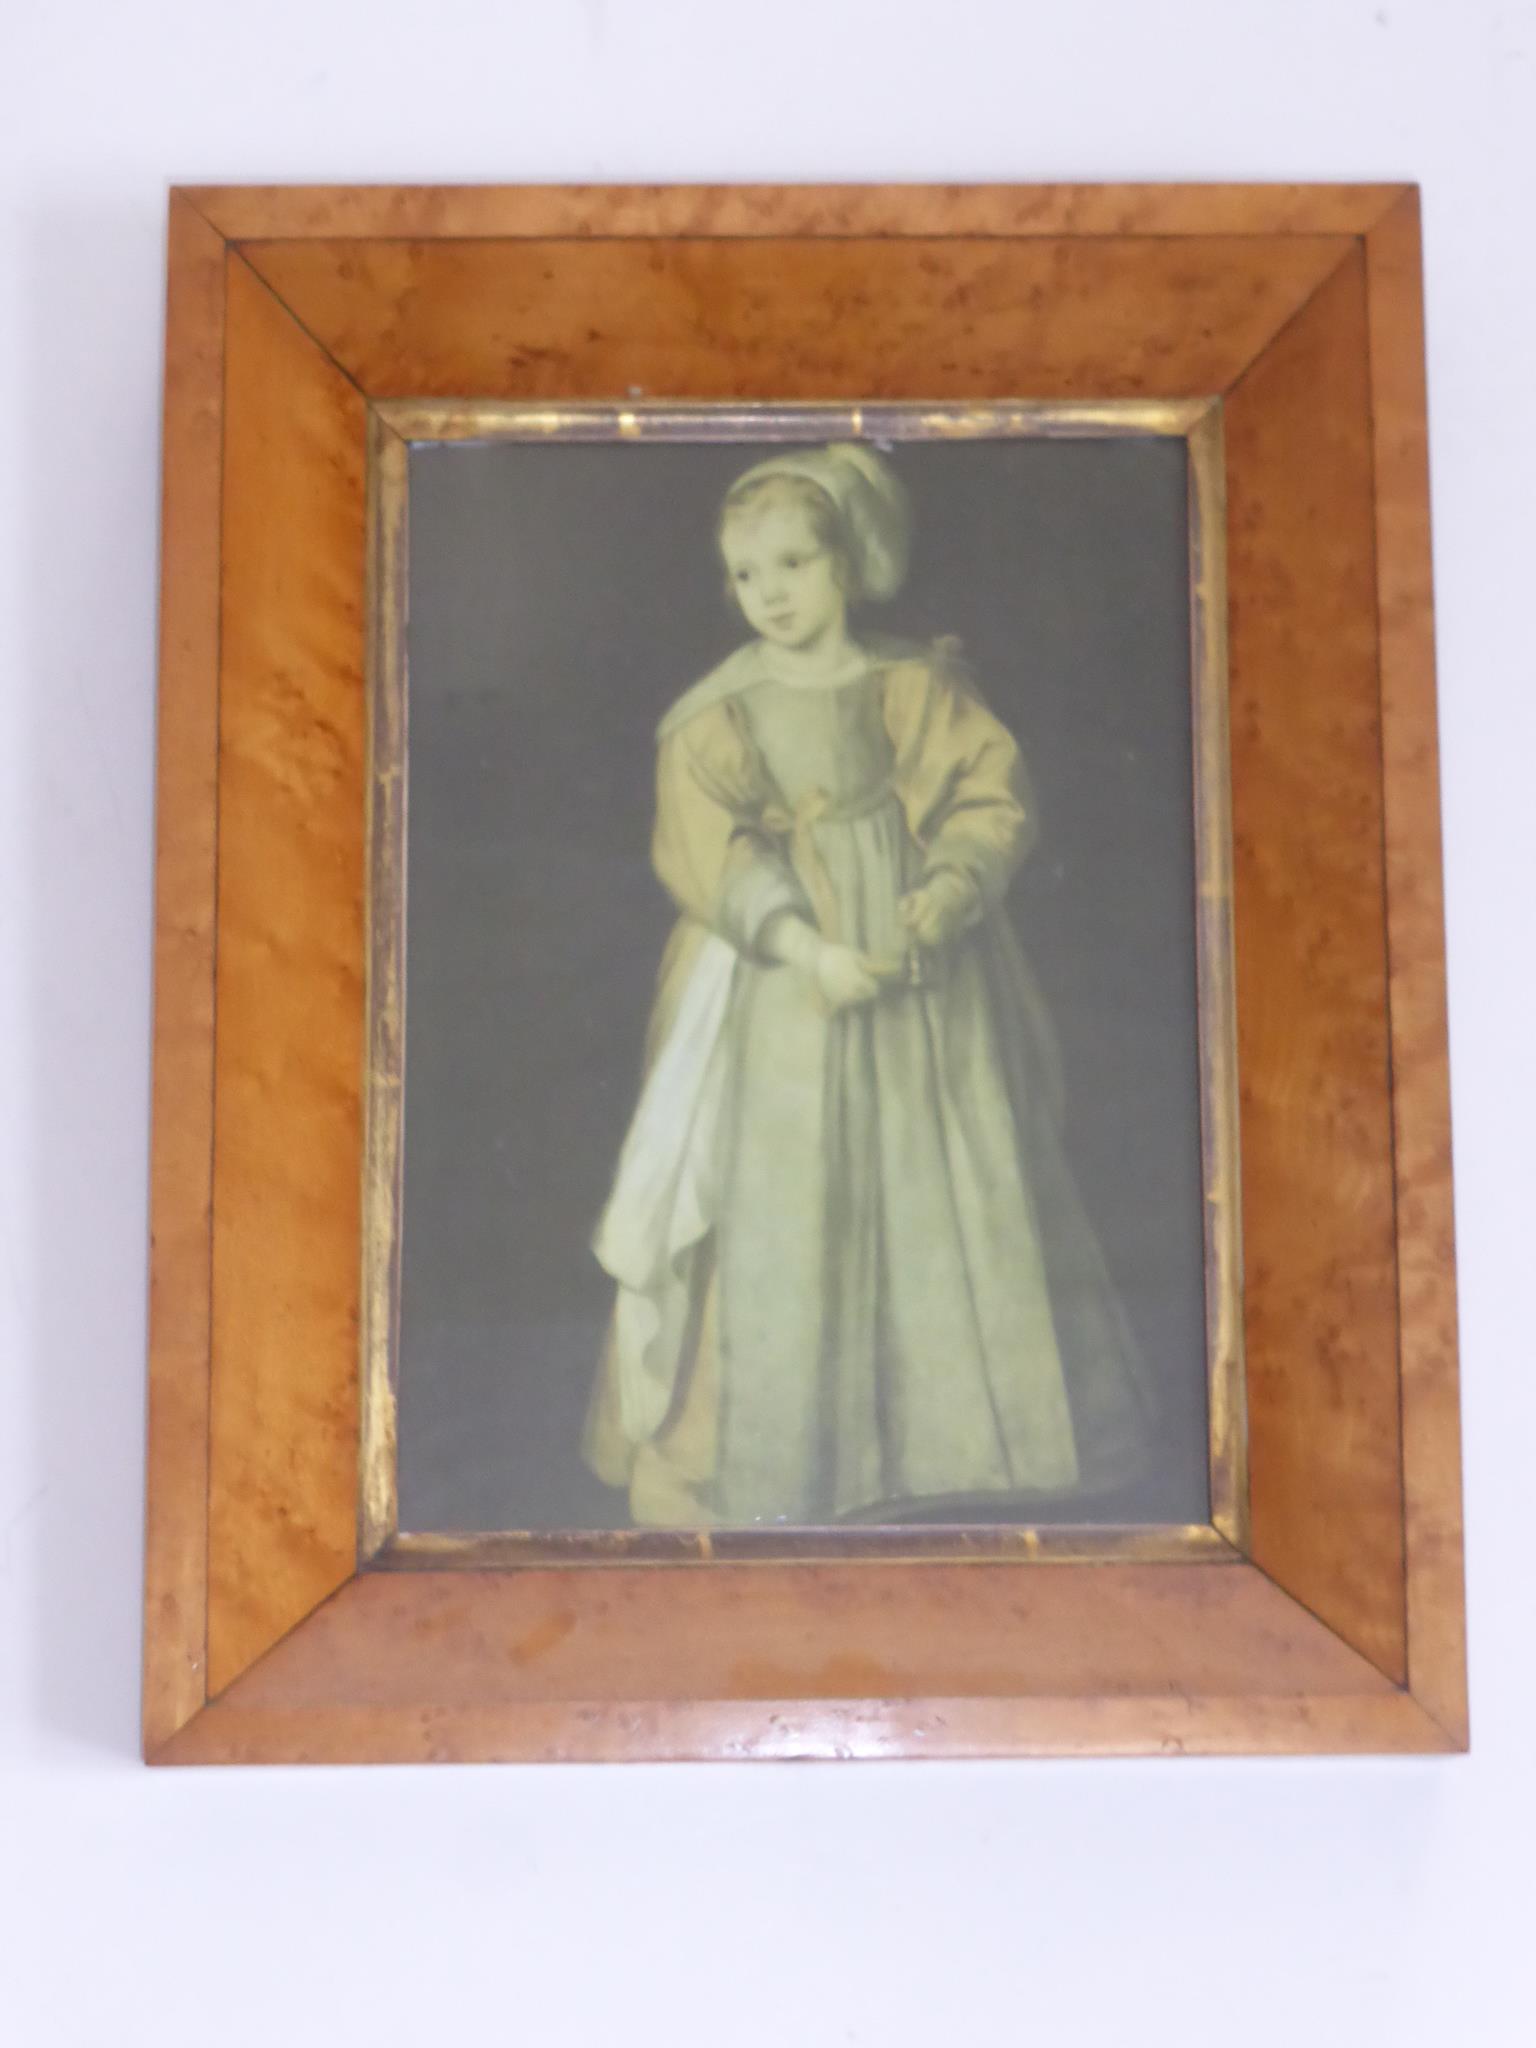 PICTURE IN GOOD QUALITY ROSEWOOD FRAME, APPROX. 40 X 32 cm OVERALL